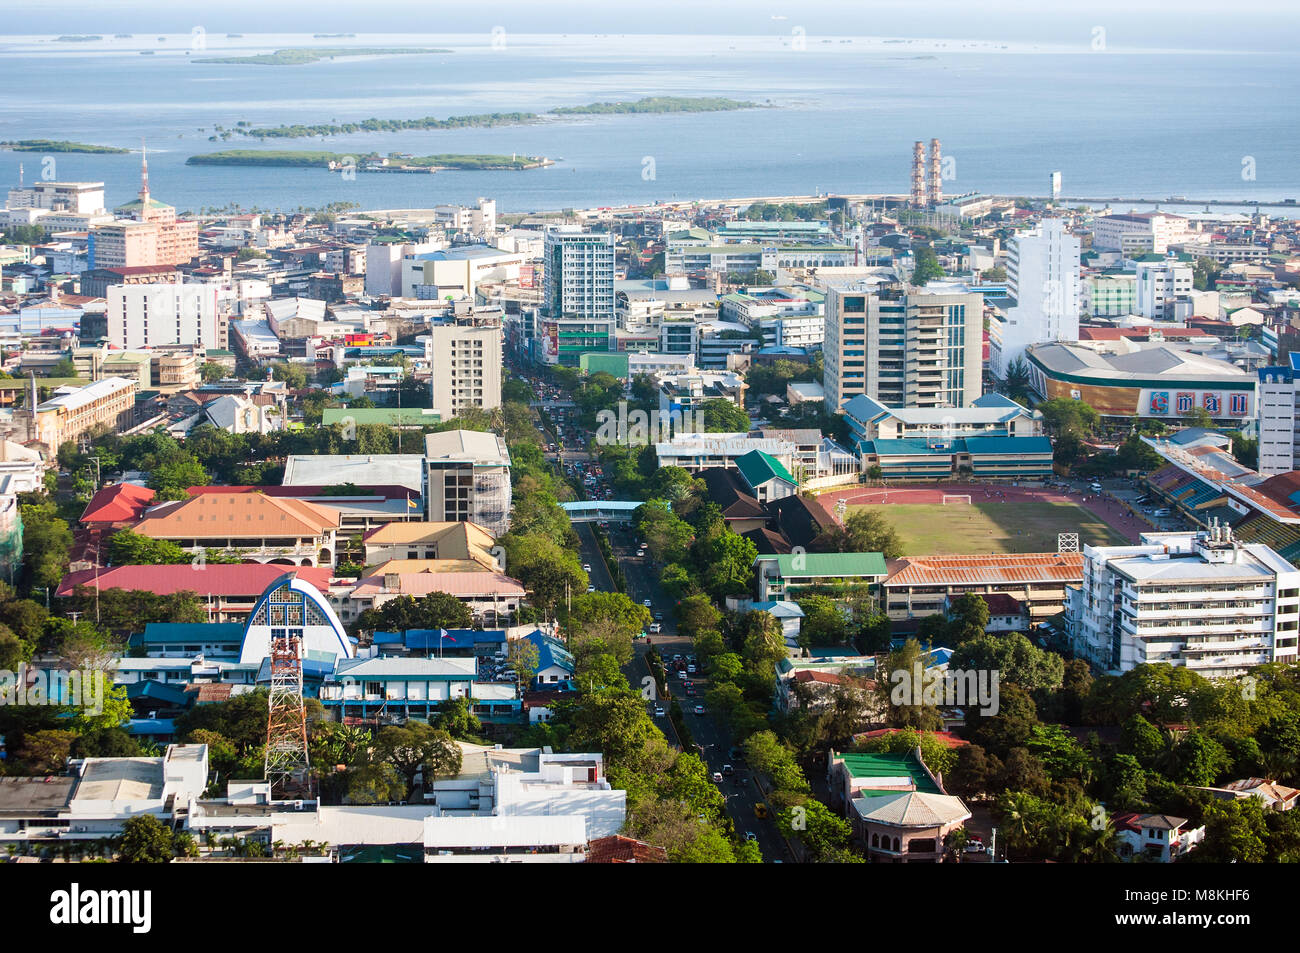 Aerial view of Osmeña Boulevard looking east, with Mactan Channel beyond, Cebu City, Philippines Stock Photo